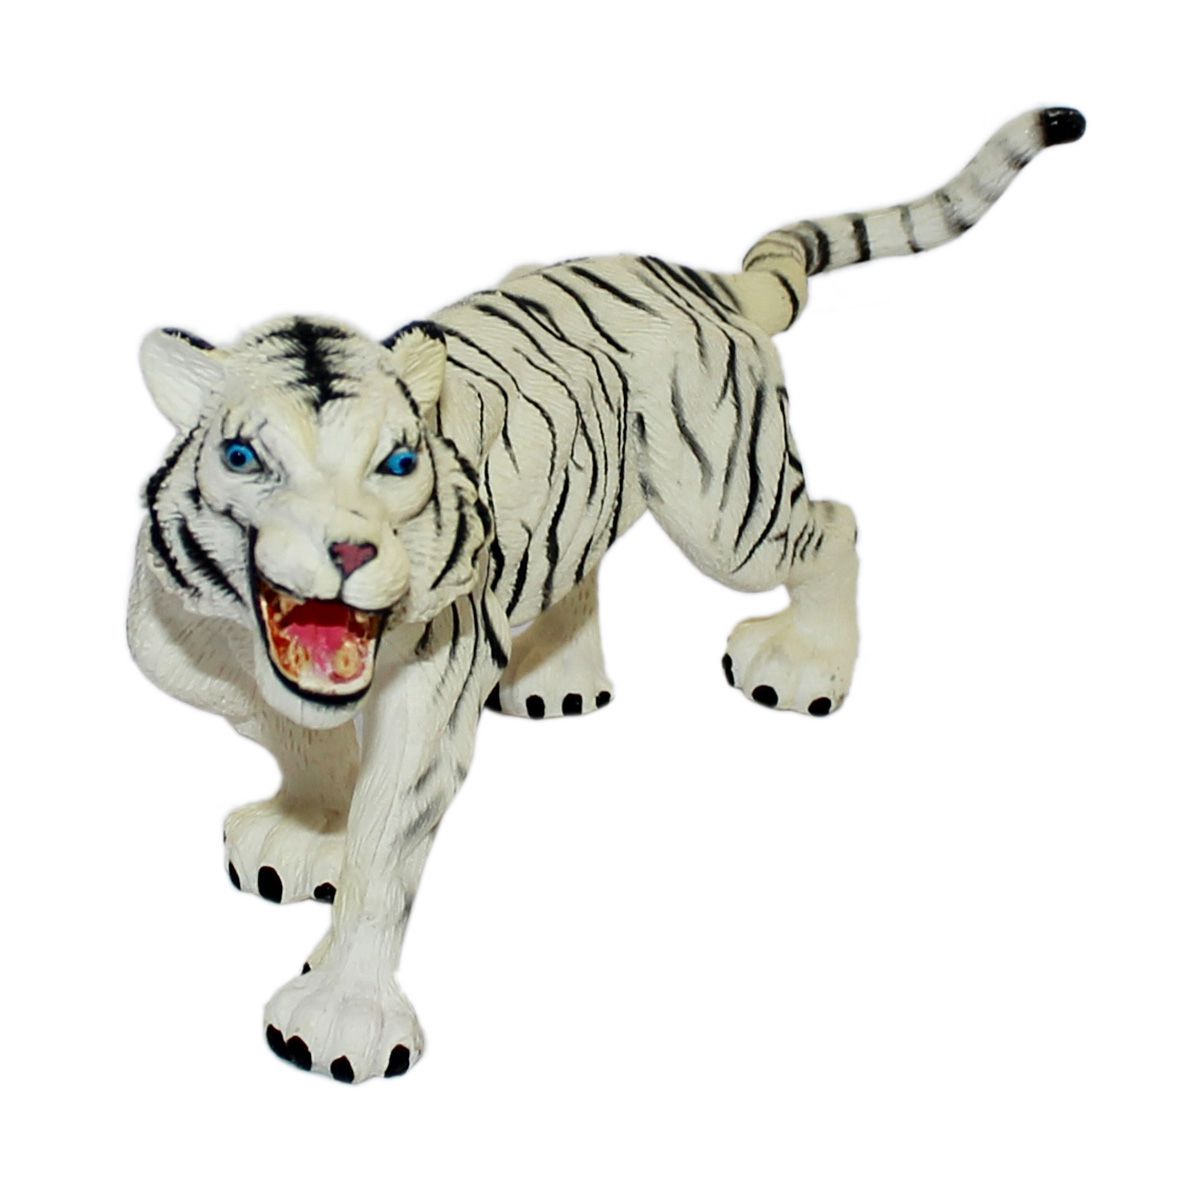  Inch White Tiger Toy Animal Figure - (TNGb128) - Big Realistically  Detailed Toys - Buy  Inch White Tiger Toy Animal Figure - (TNGb128) - Big  Realistically Detailed Toys Online at Low Price - Snapdeal